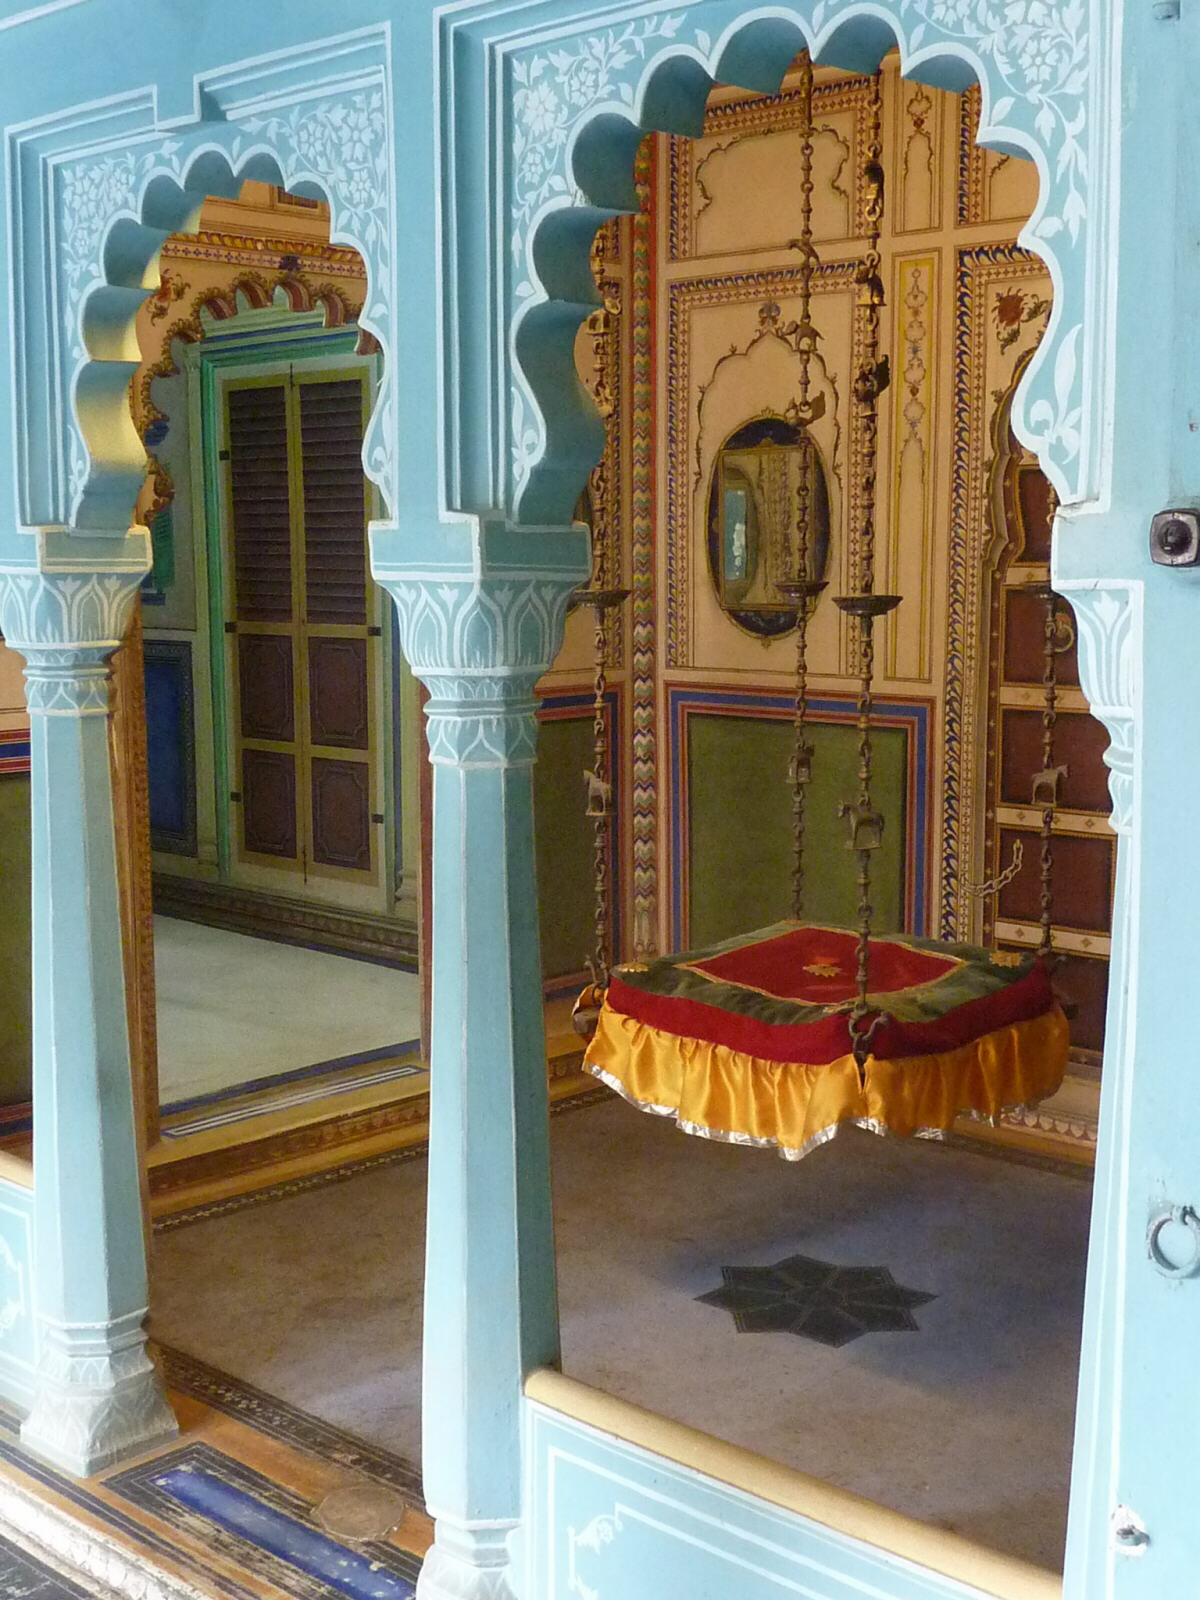 A swing in the City Palace in Udaipur, Rajasthan